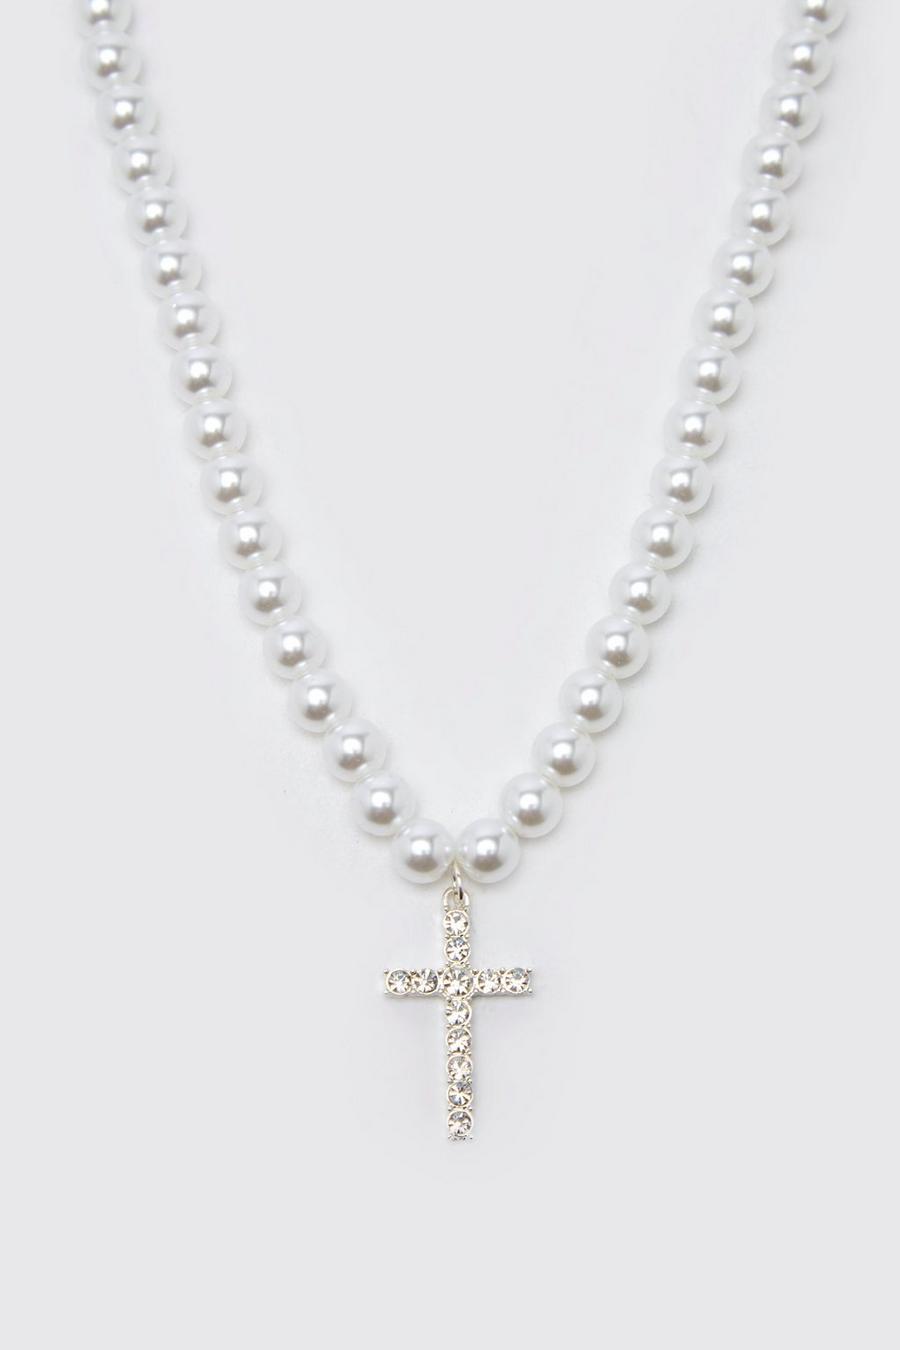 Silver Pearl And Iced Cross Necklace